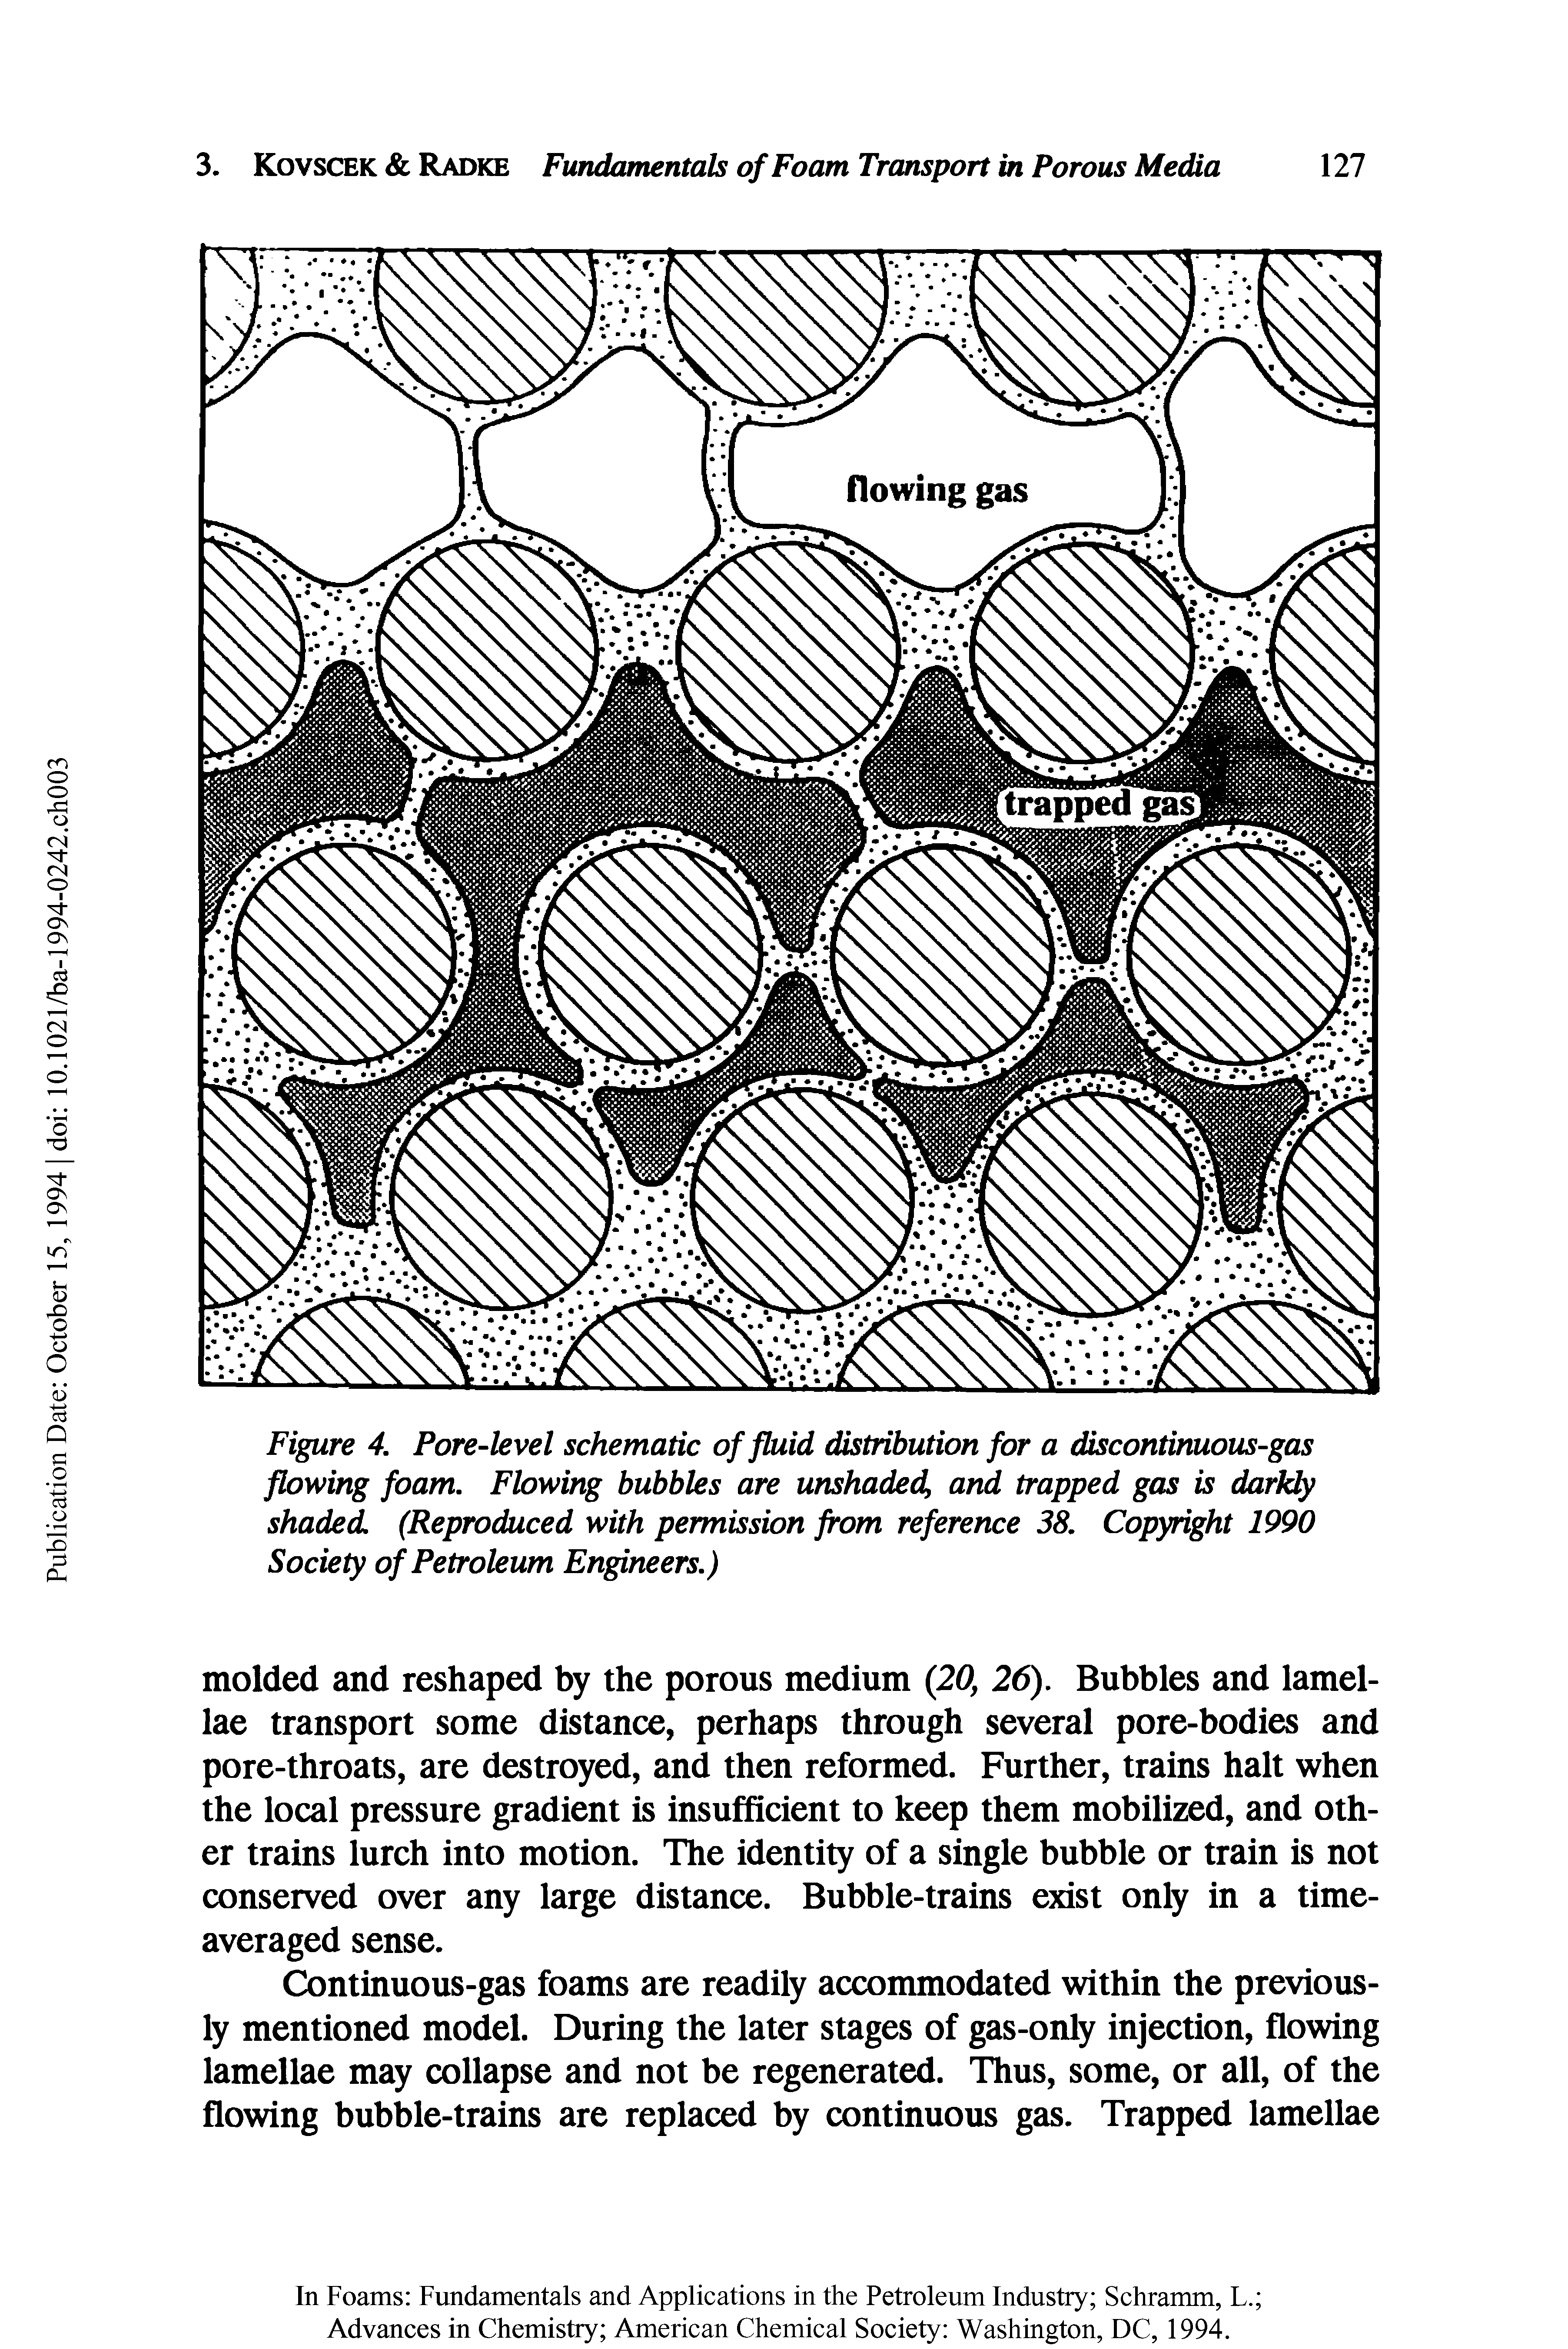 Figure 4. Pore-level schematic of fluid distribution for a discontinuous-gas flowing foam. Flowing bubbles are unshaded, and trapped gas is darkly shaded. (Reproduced with permission from reference 38. Copyright 1990 Society of Petroleum Engineers.)...